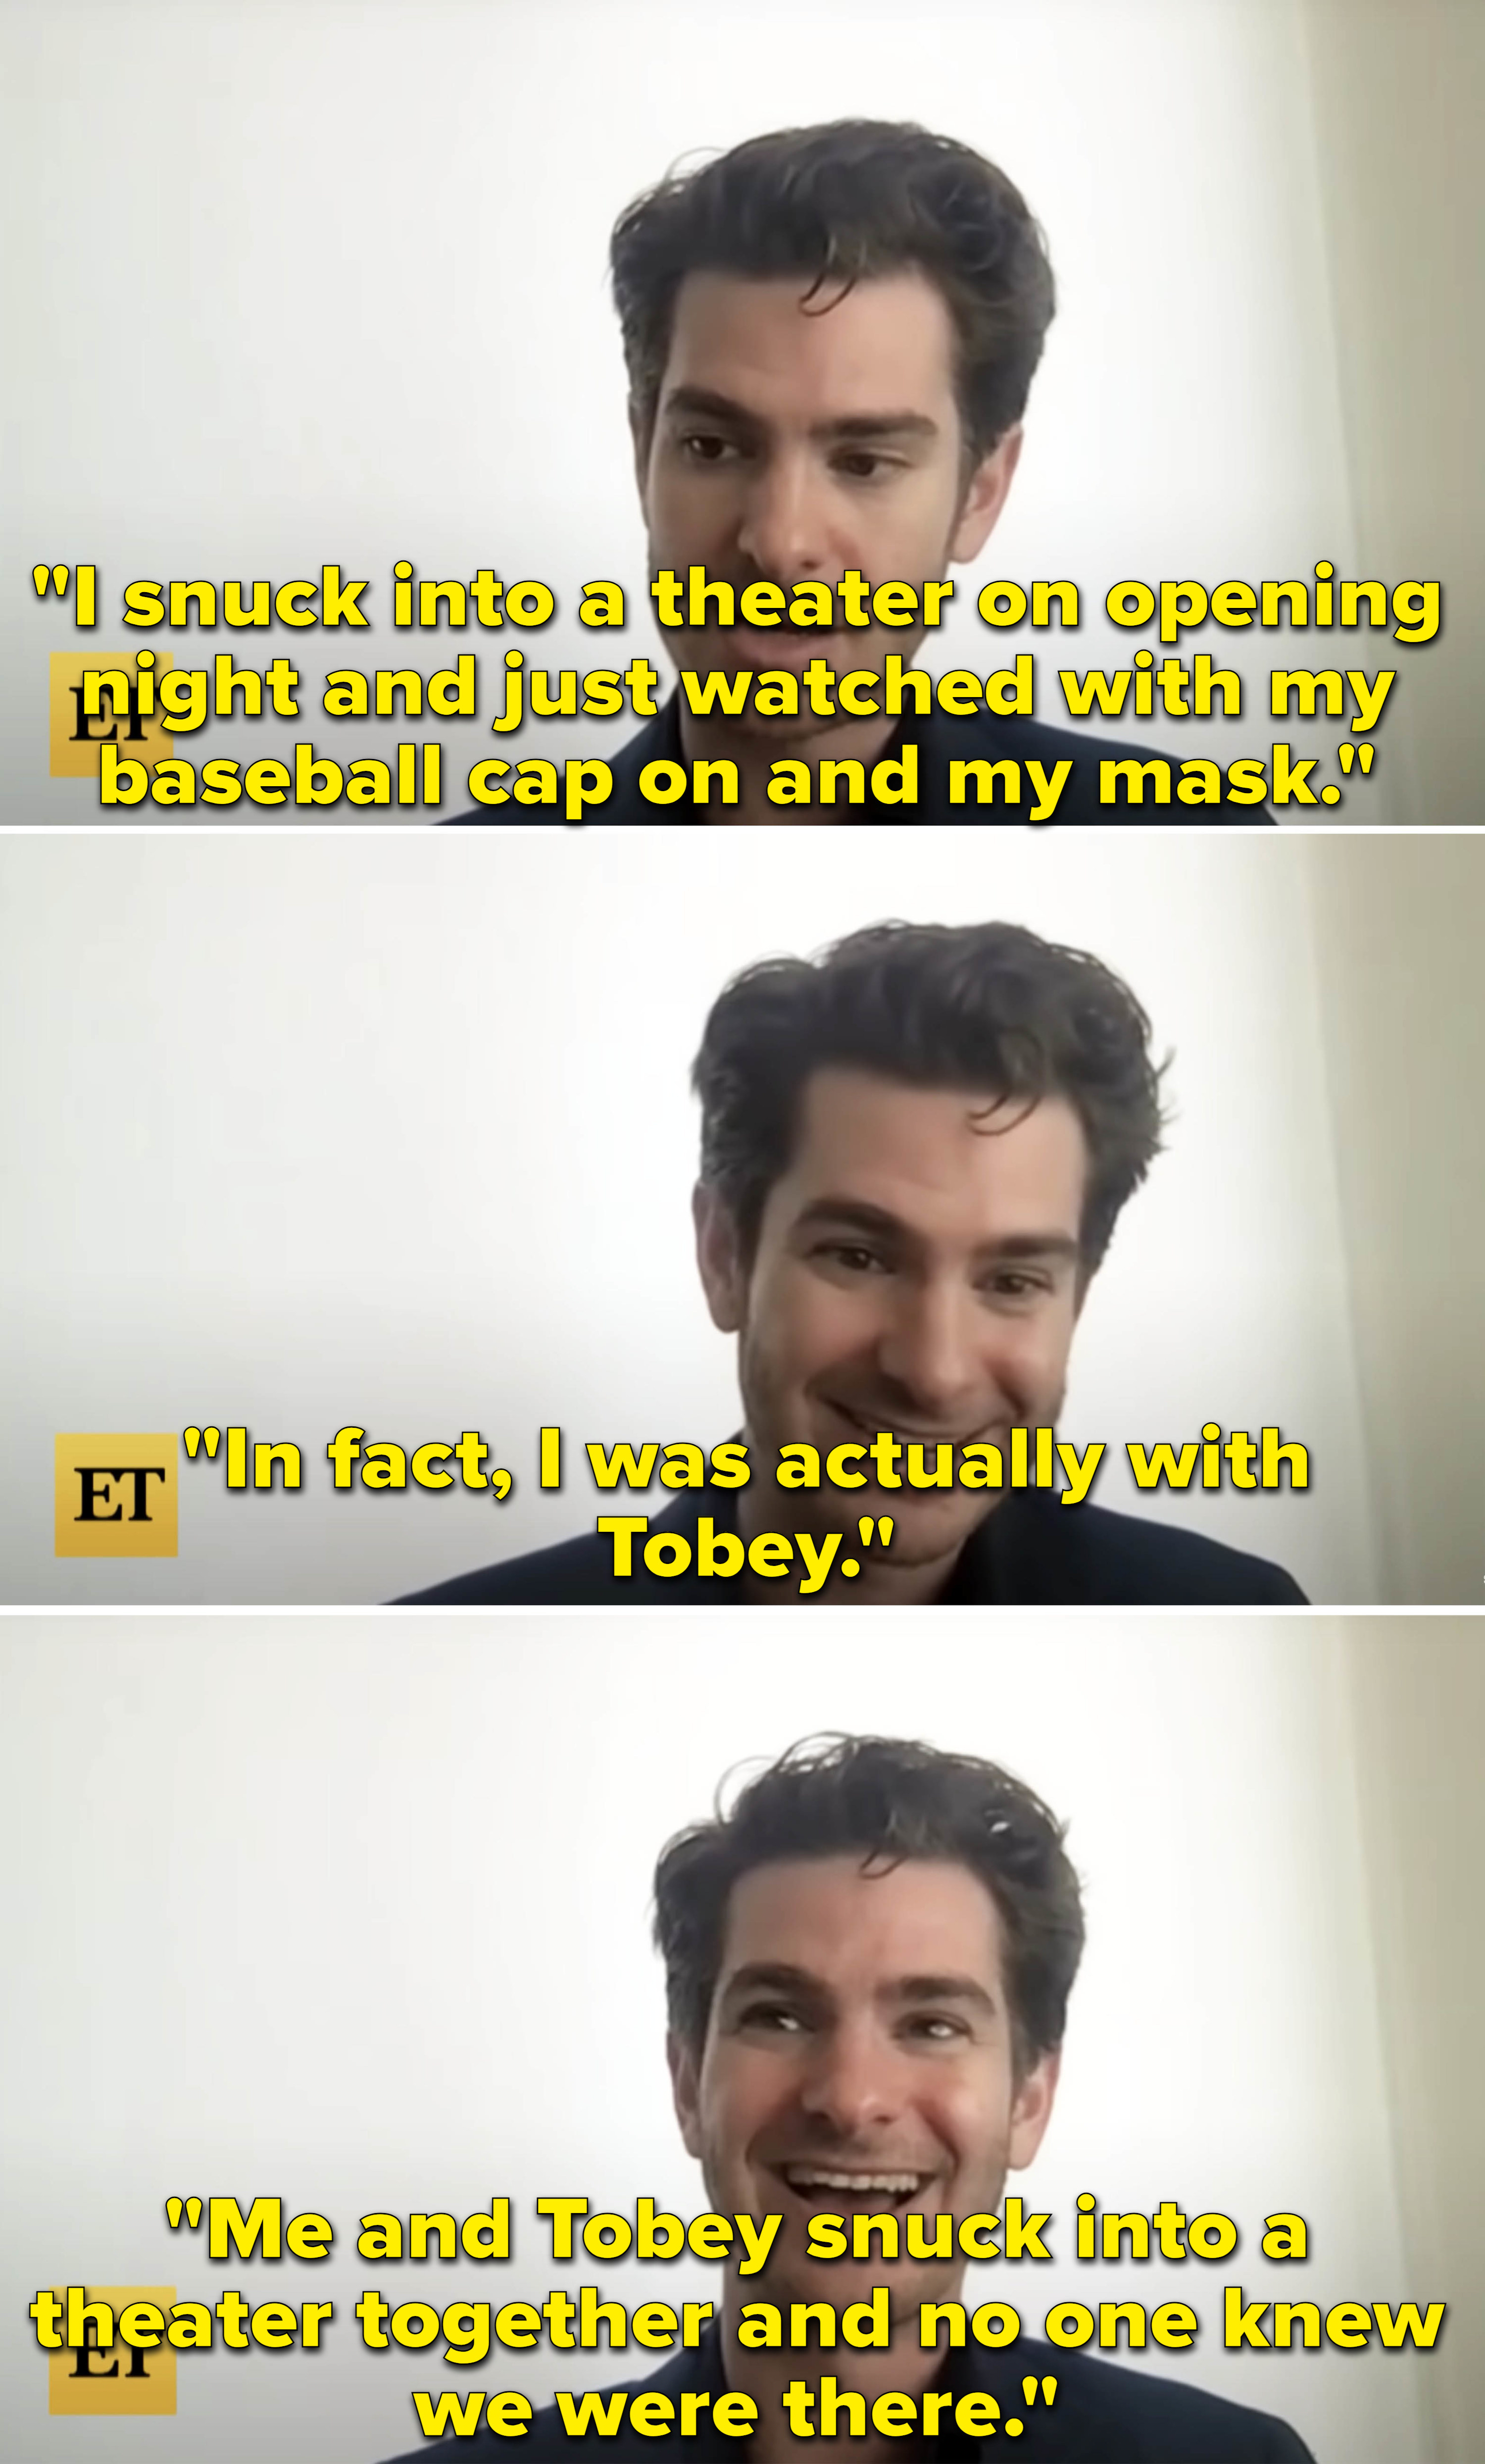 Andrew explaining how he and Tobey wore baseball caps and snuck into a screening